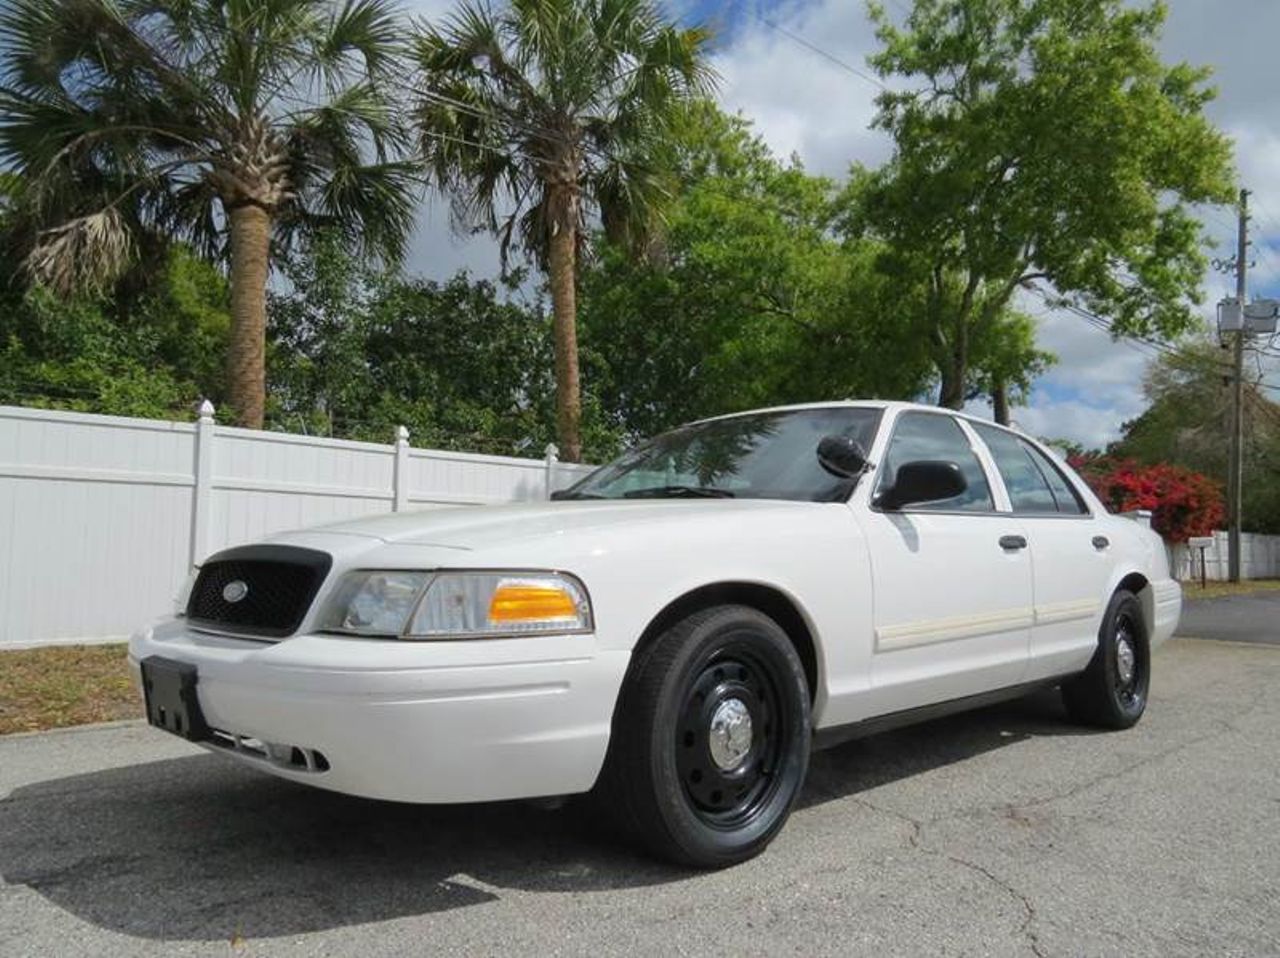 2010 Ford Crown Victoria Police Interceptor | Mitchell, SD, Vibrant White Clearcoat (White), Rear Wheel